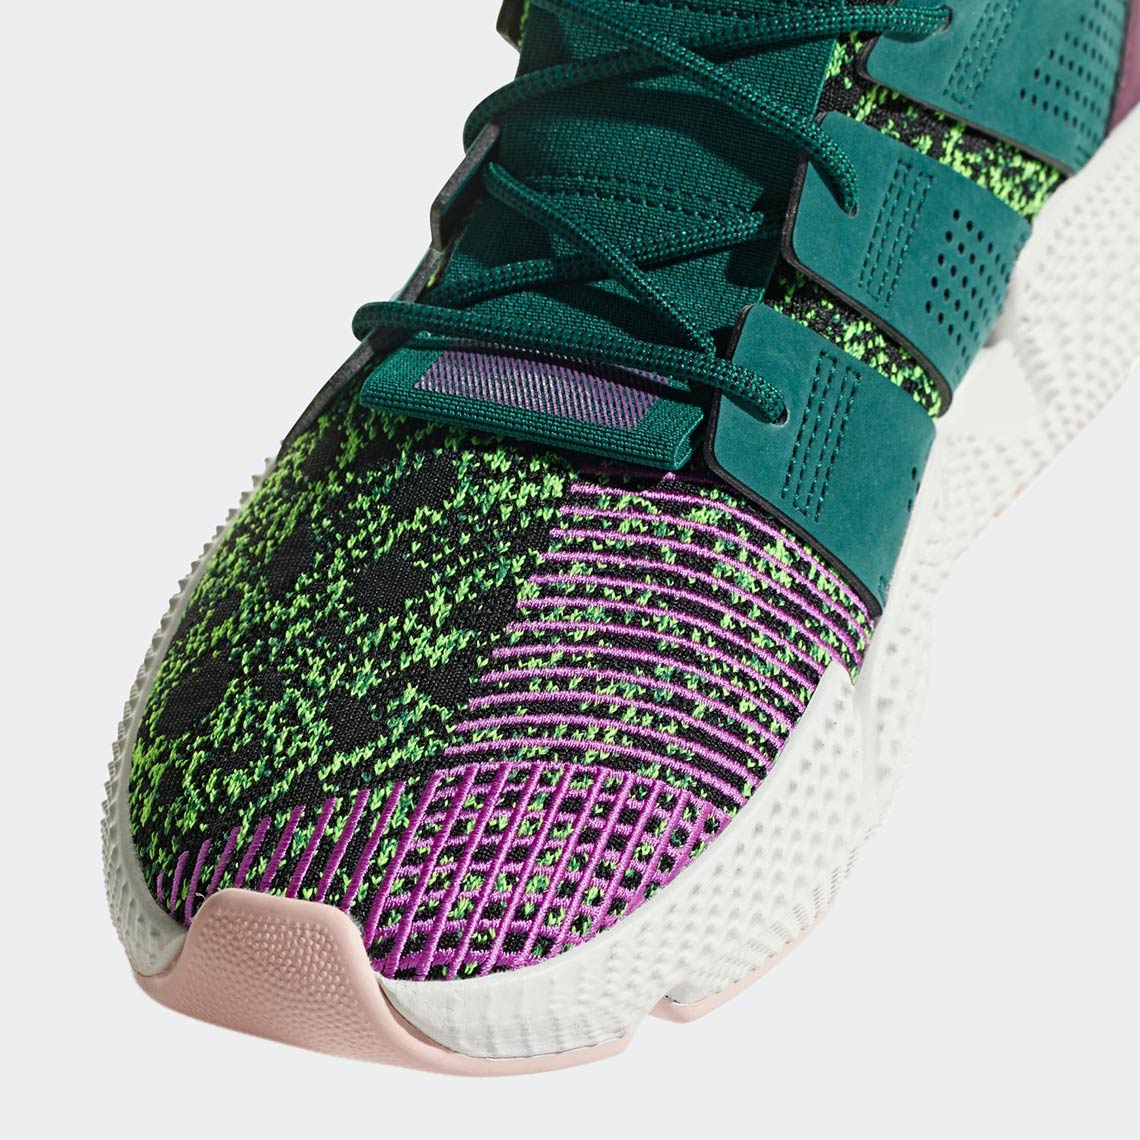 Adidas Dragon Ball Z Prophere Cell D97053 5